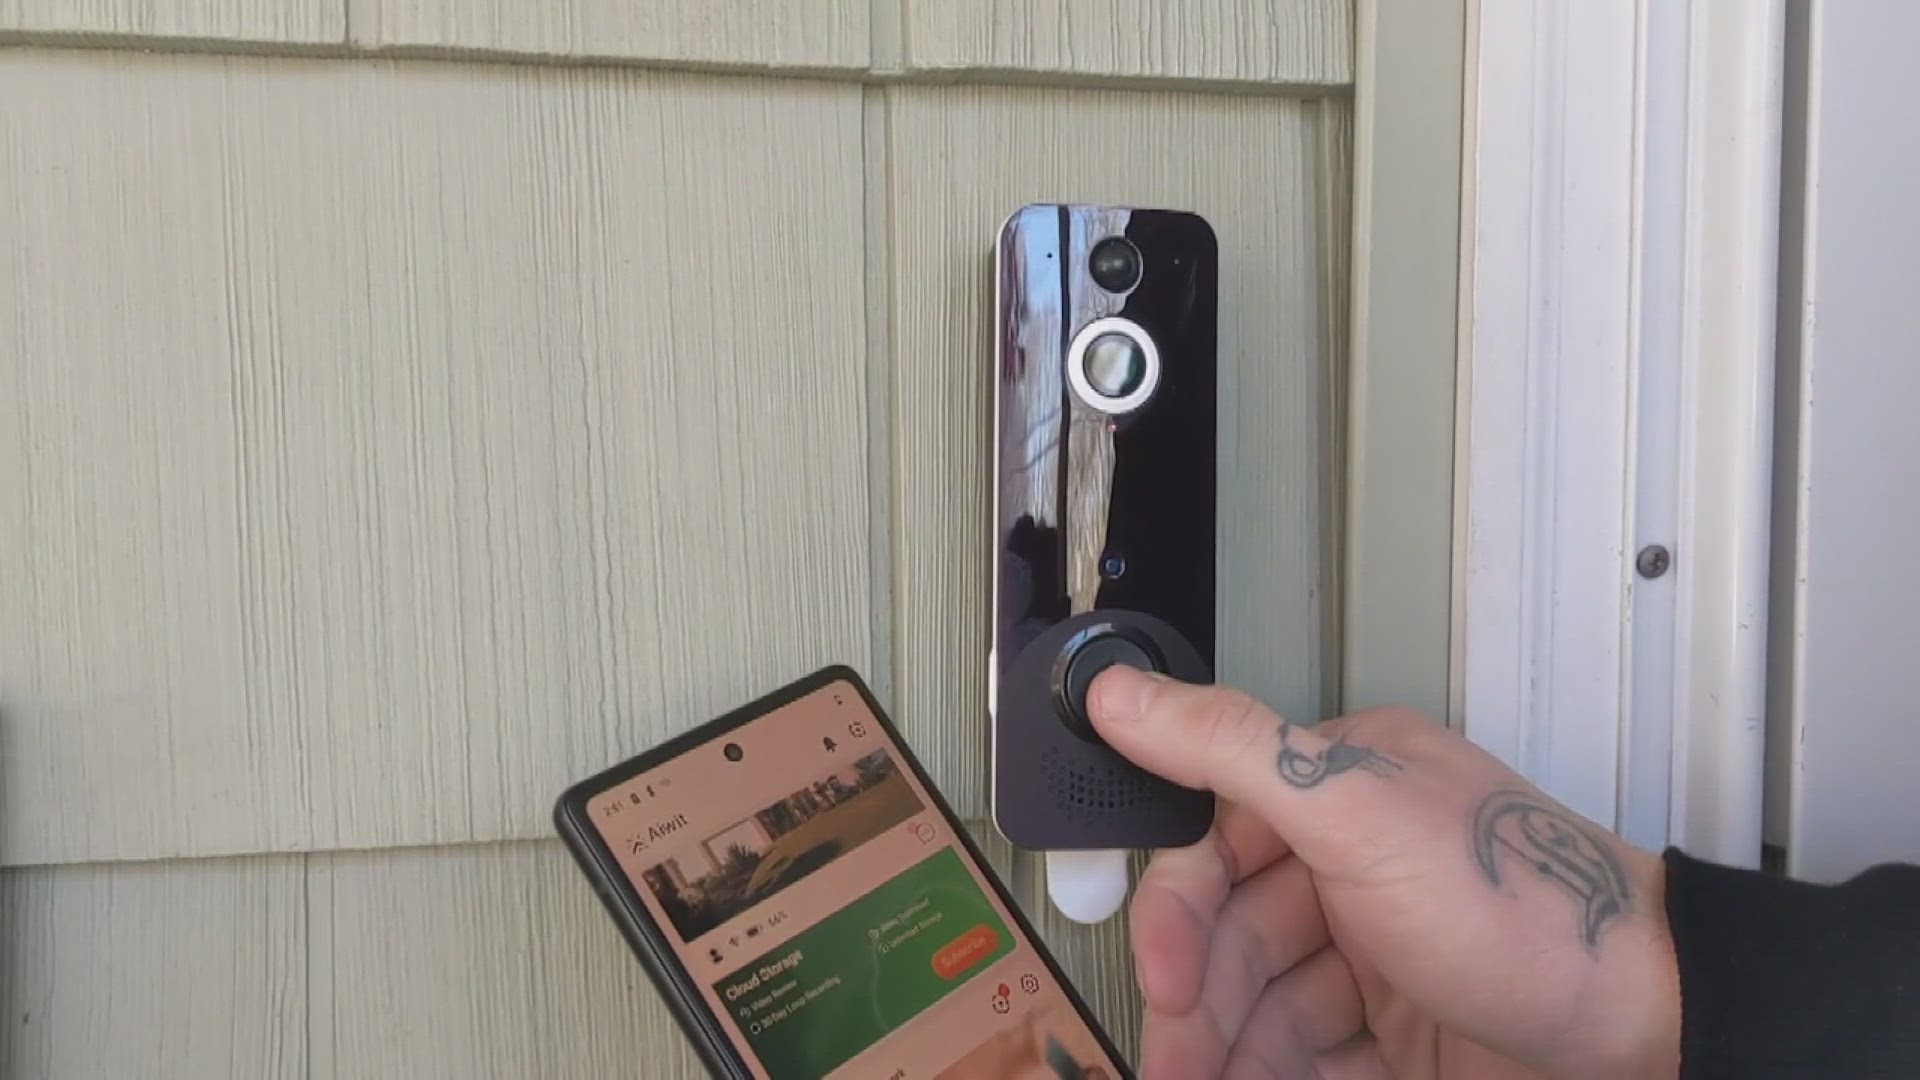 Video doorbells make it easy for you to watch who's coming and going, but who else might be viewing those videos? The answer: hackers.